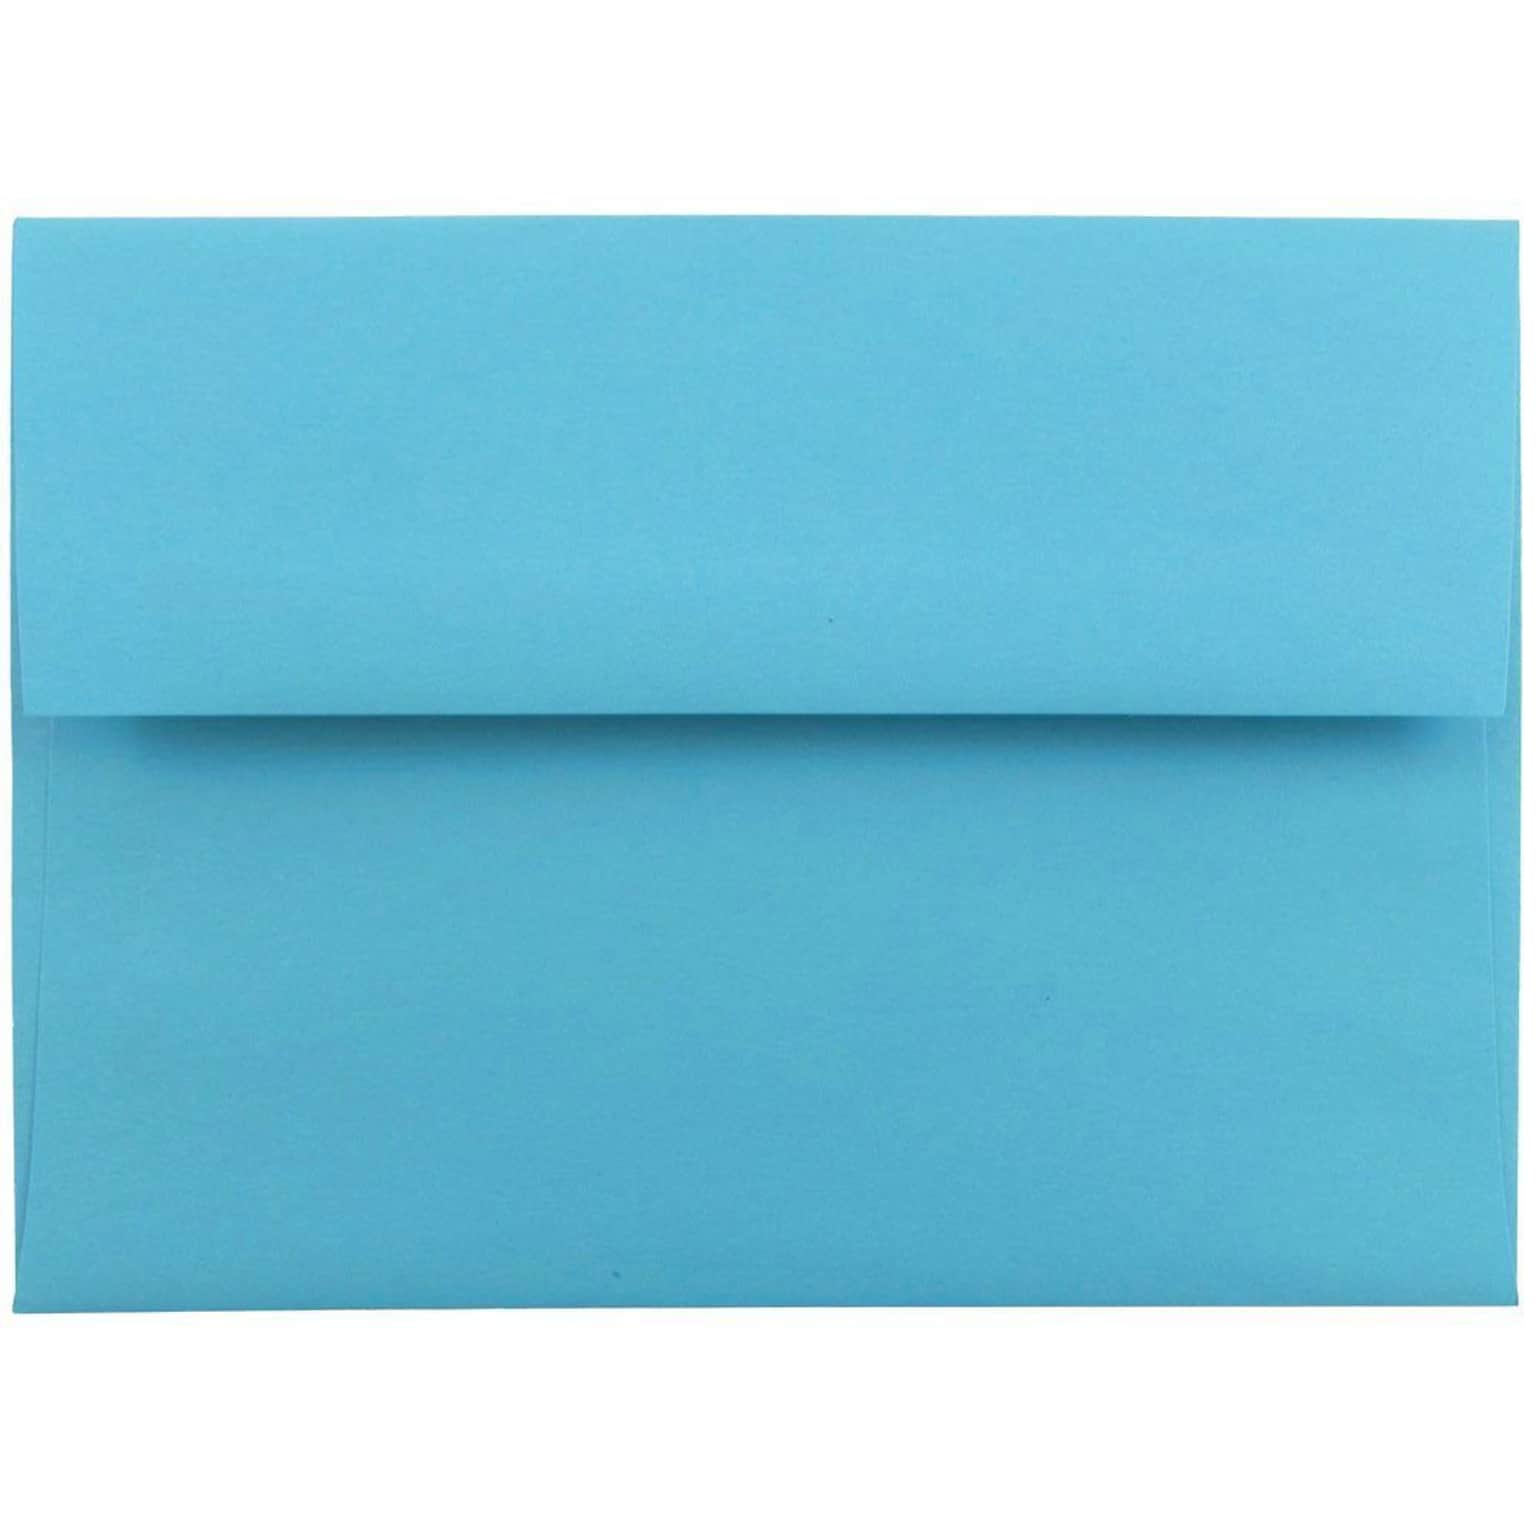 JAM Paper® A6 Colored Invitation Envelopes, 4.75 x 6.5, Blue Recycled, 50/Pack (94523I)